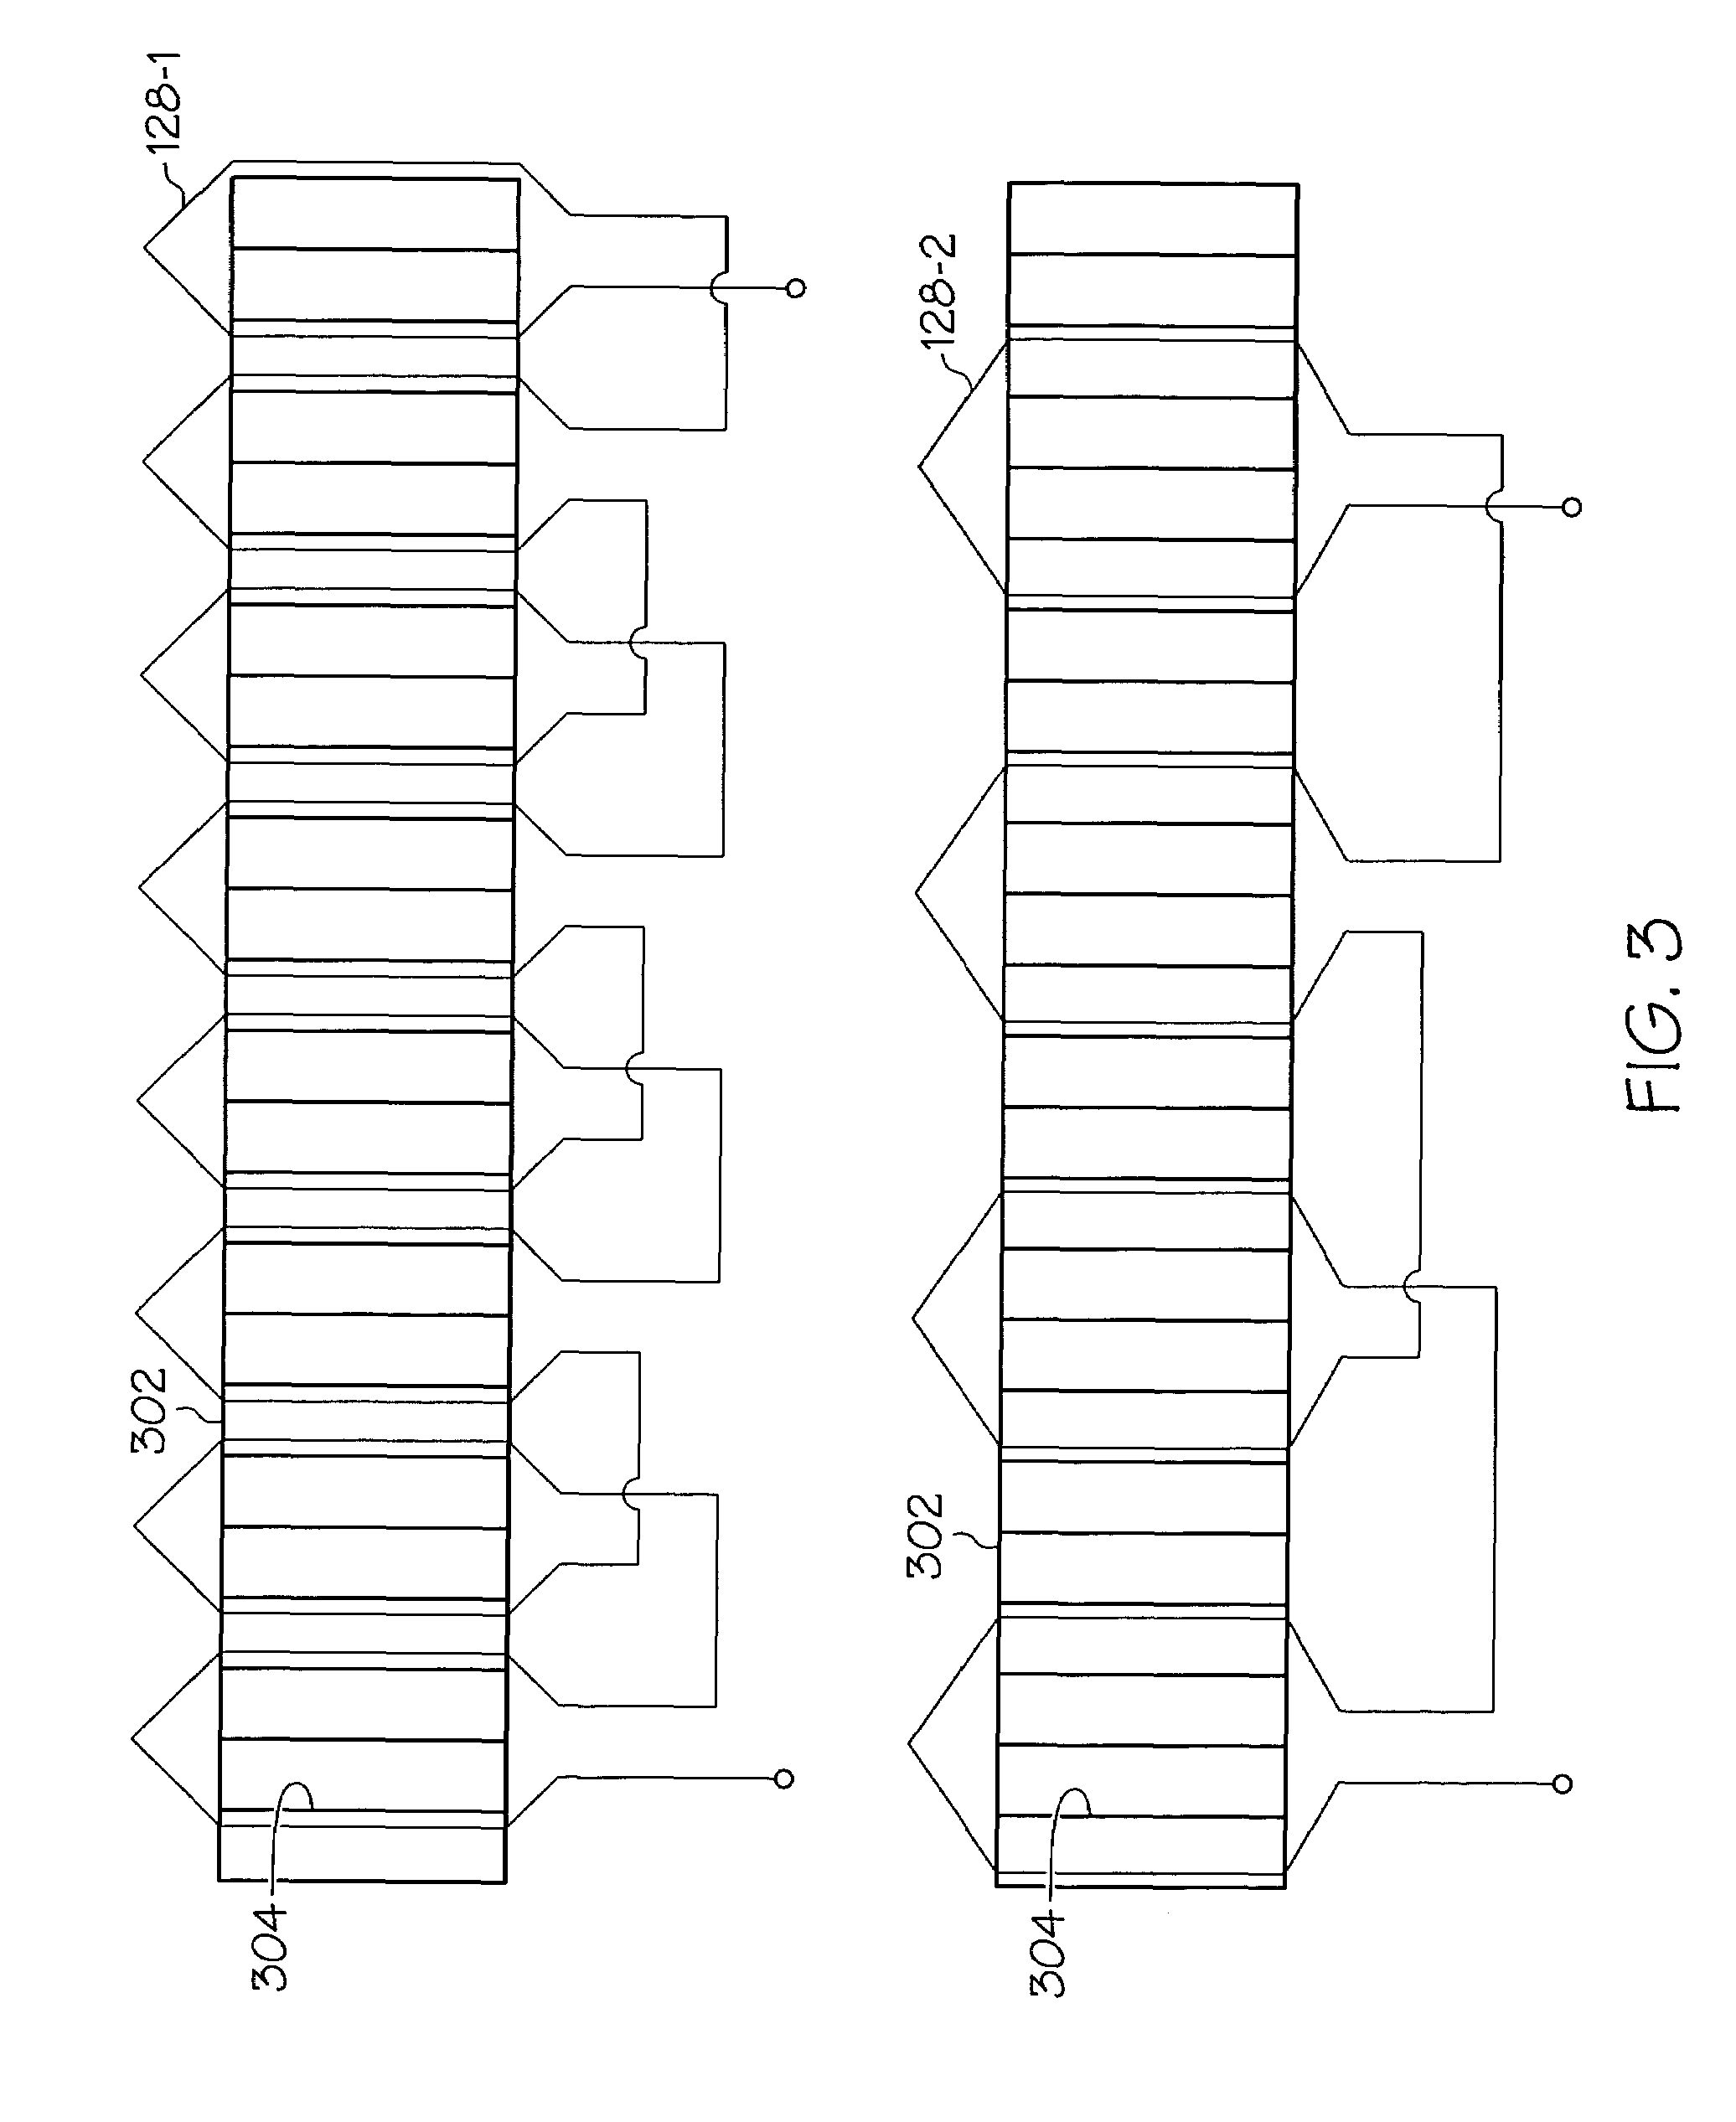 Starter-generator operable with multiple variable frequencies and voltages